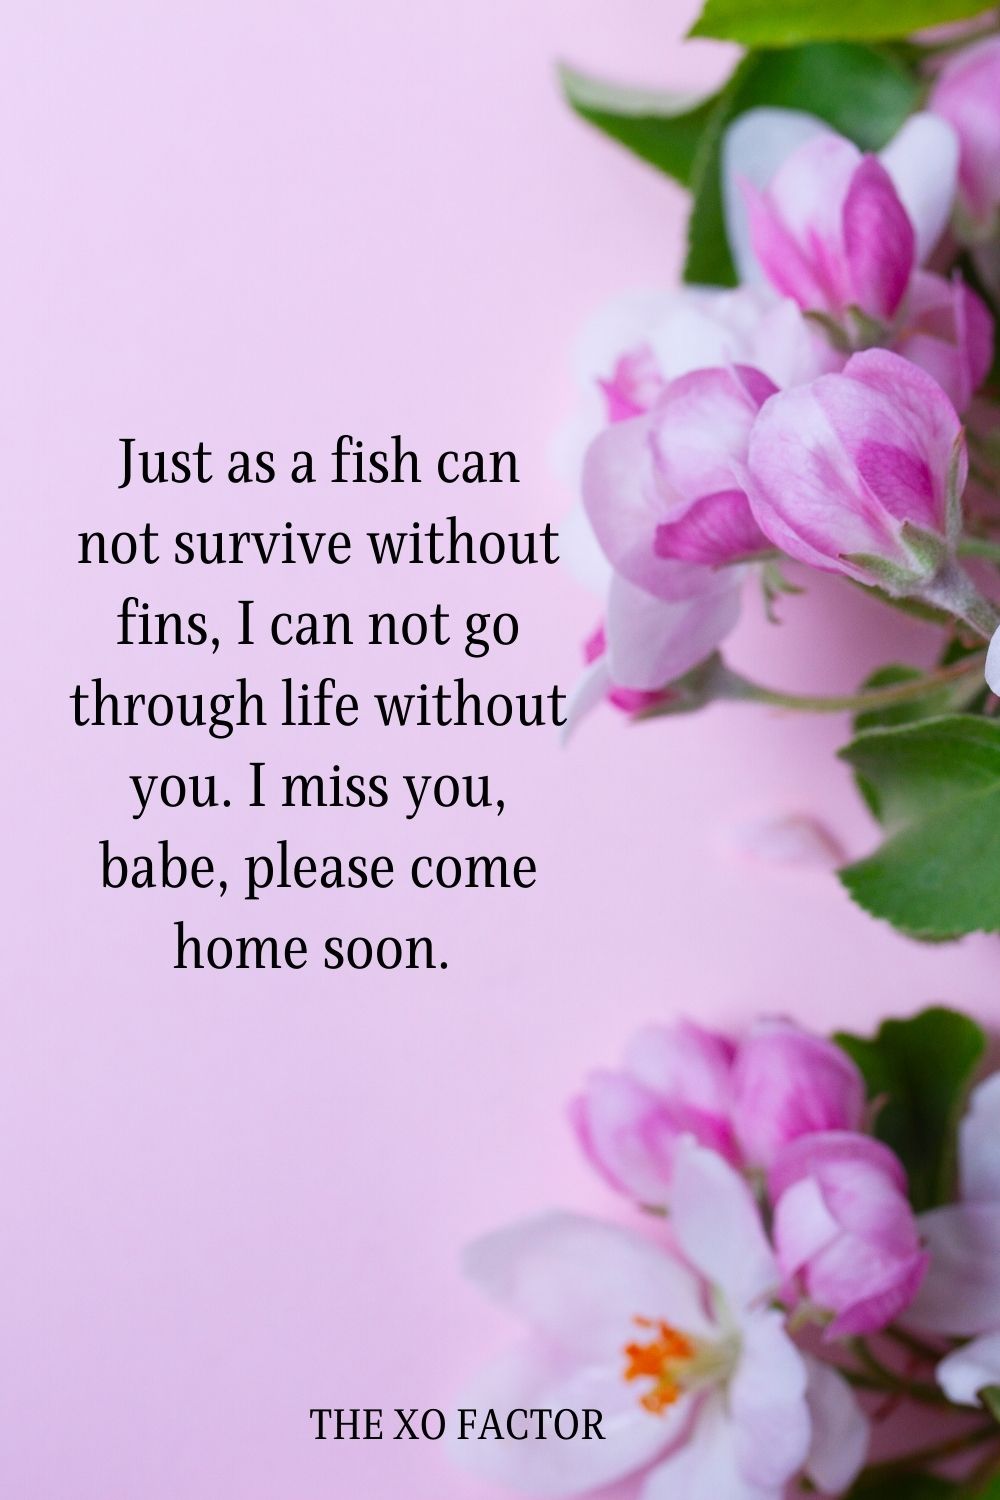 Just as a fish can not survive without fins, I can not go through life without you. I miss you, babe, please come home soon. 